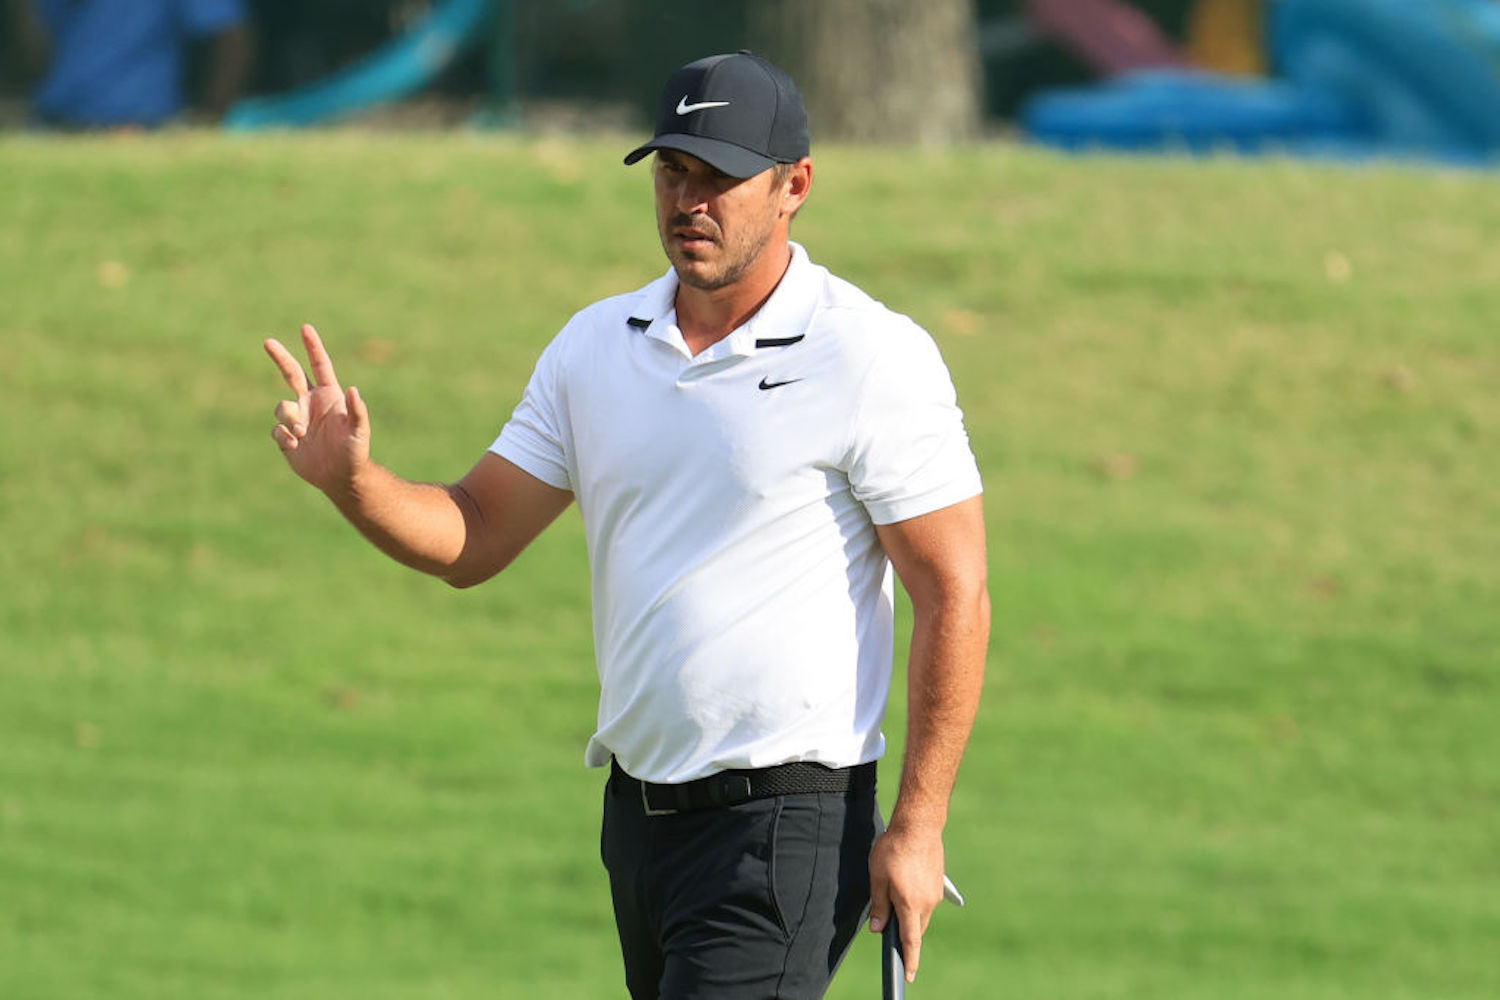 Brooks Koepka Just Sent a Terrifying Message to the Rest of the PGA Tour Ahead of the PGA Championship